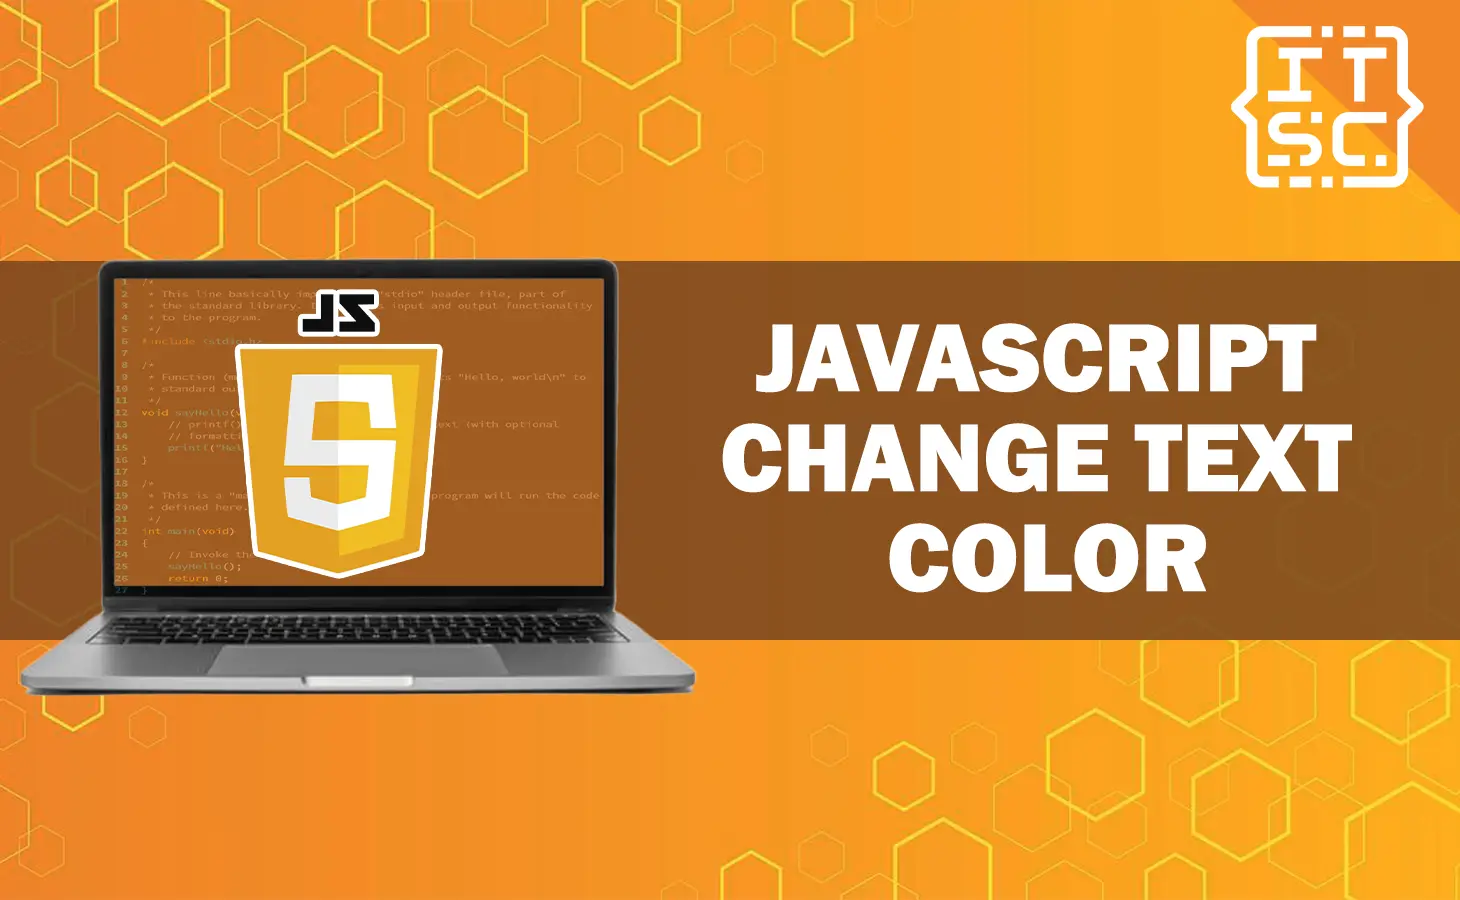 How to change text color in JavaScript dynamically?